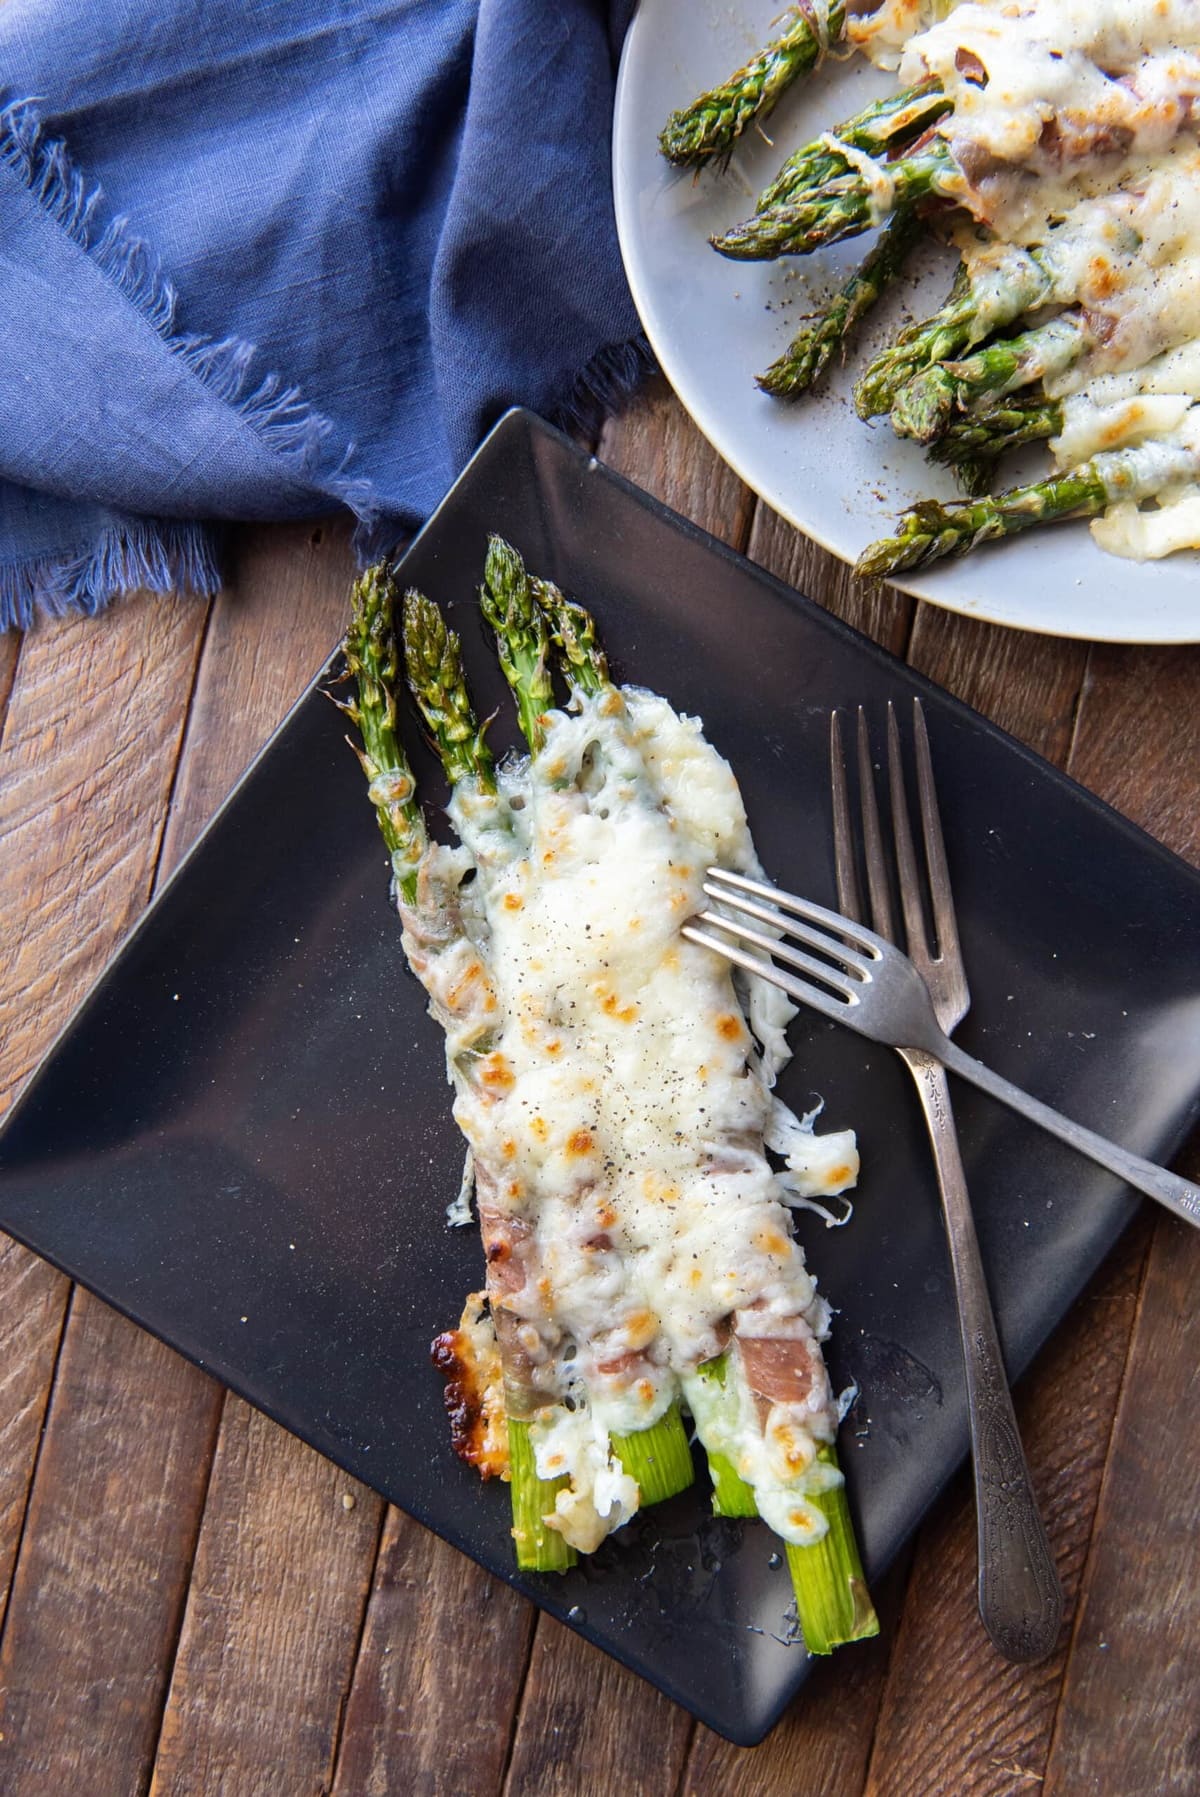 Cheesy baked asparagus on a black plate, served on a table.